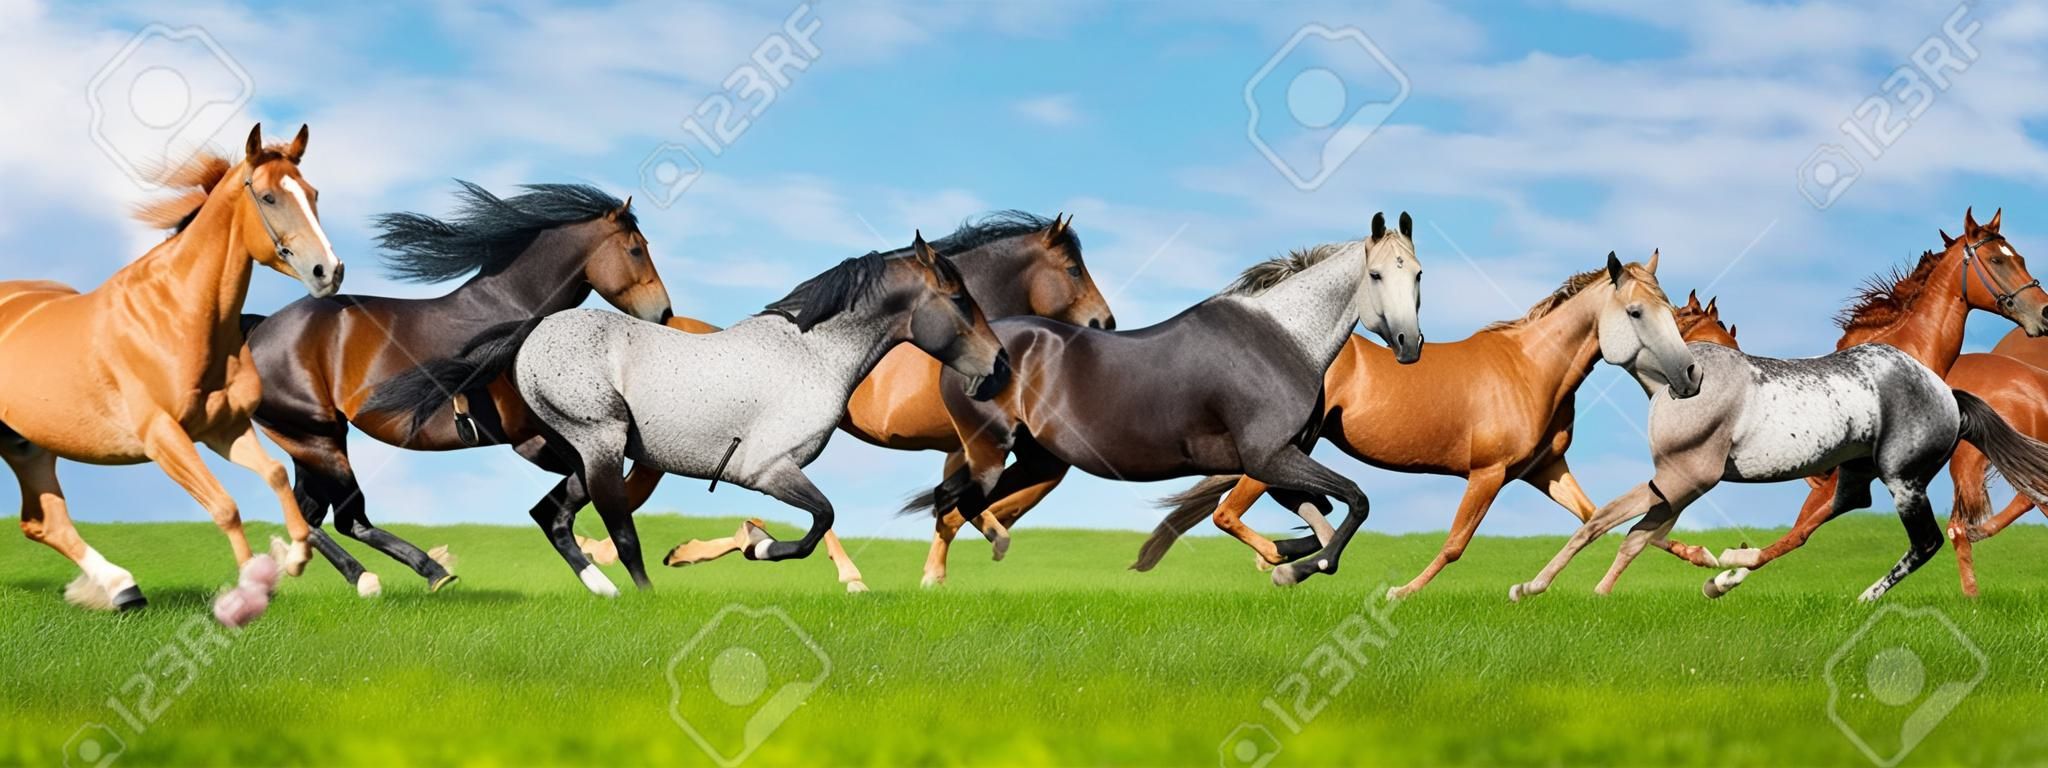 Horses free run gallop i green field with blue sky behind